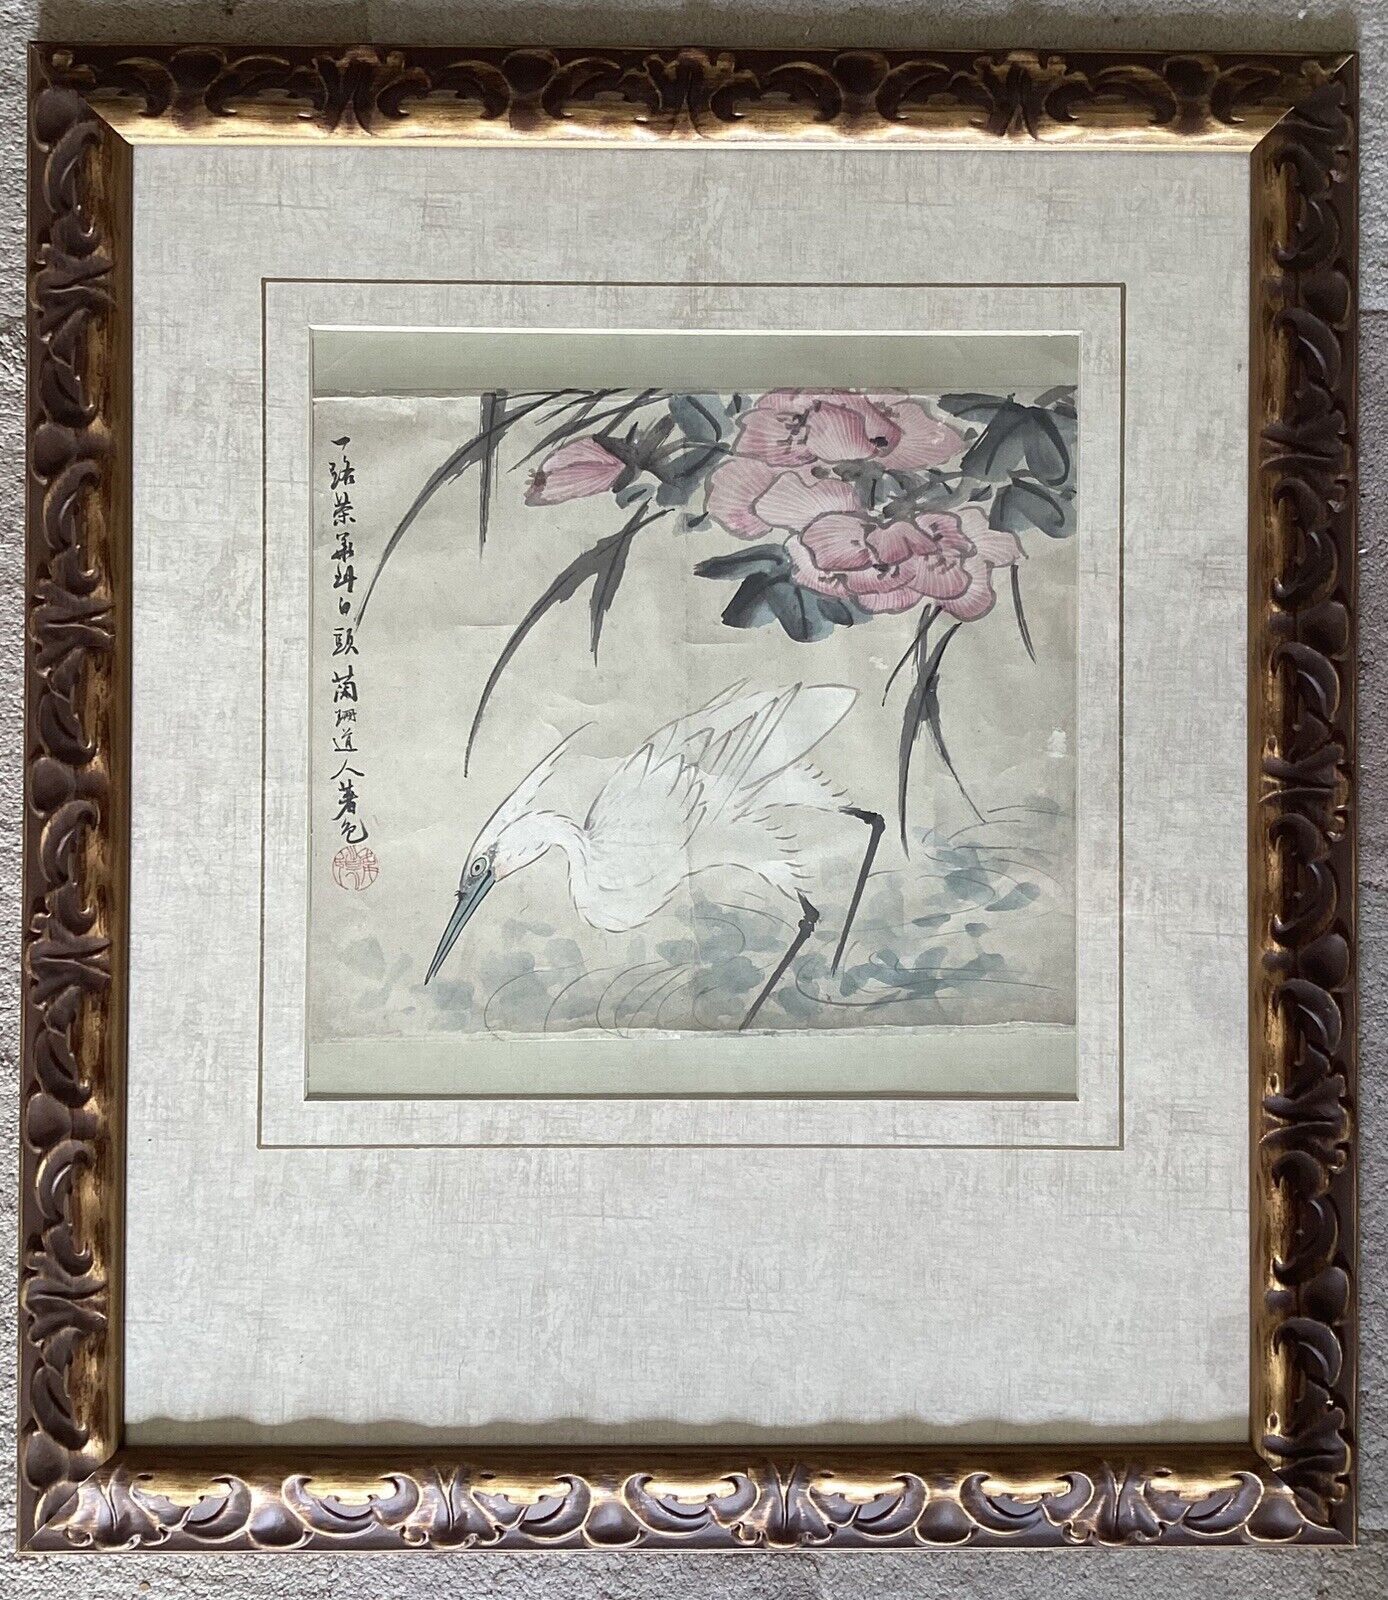 VTG Japanese Original Watercolor On Paper in Ornate Frame, Signed with Red Seal